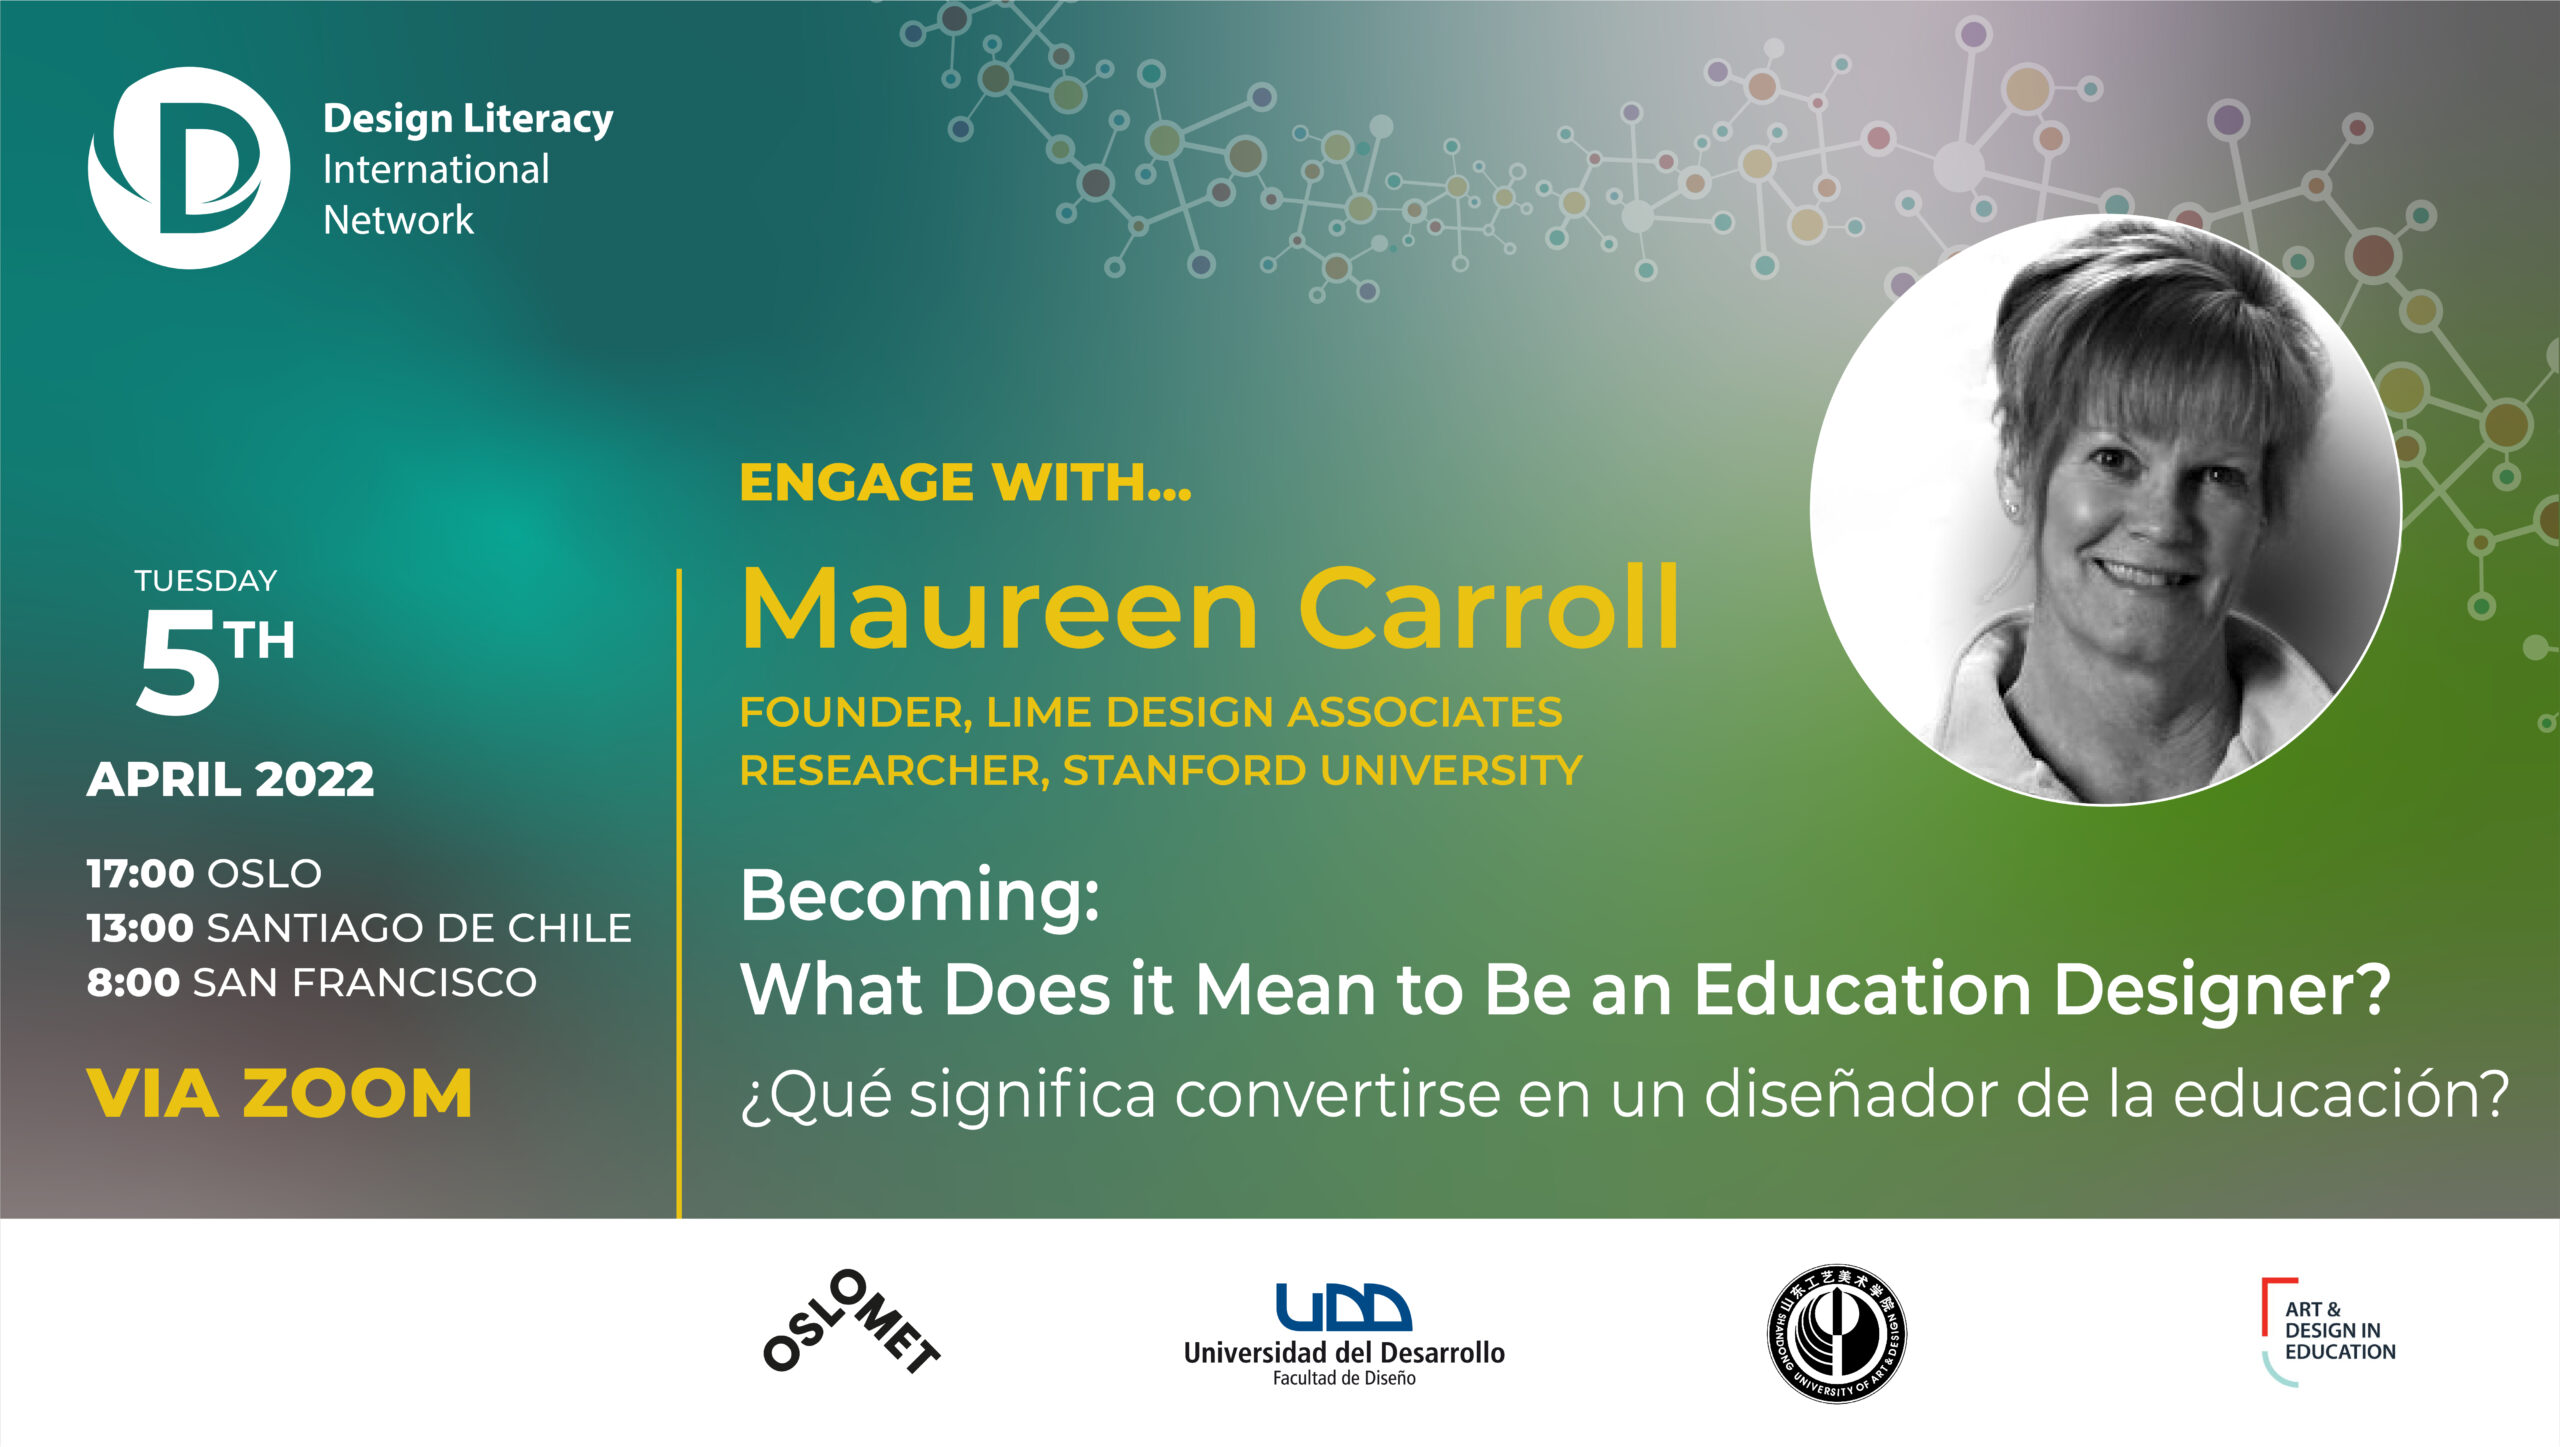 You are currently viewing Engage with Maureen Carroll | Design Literacy International Network event